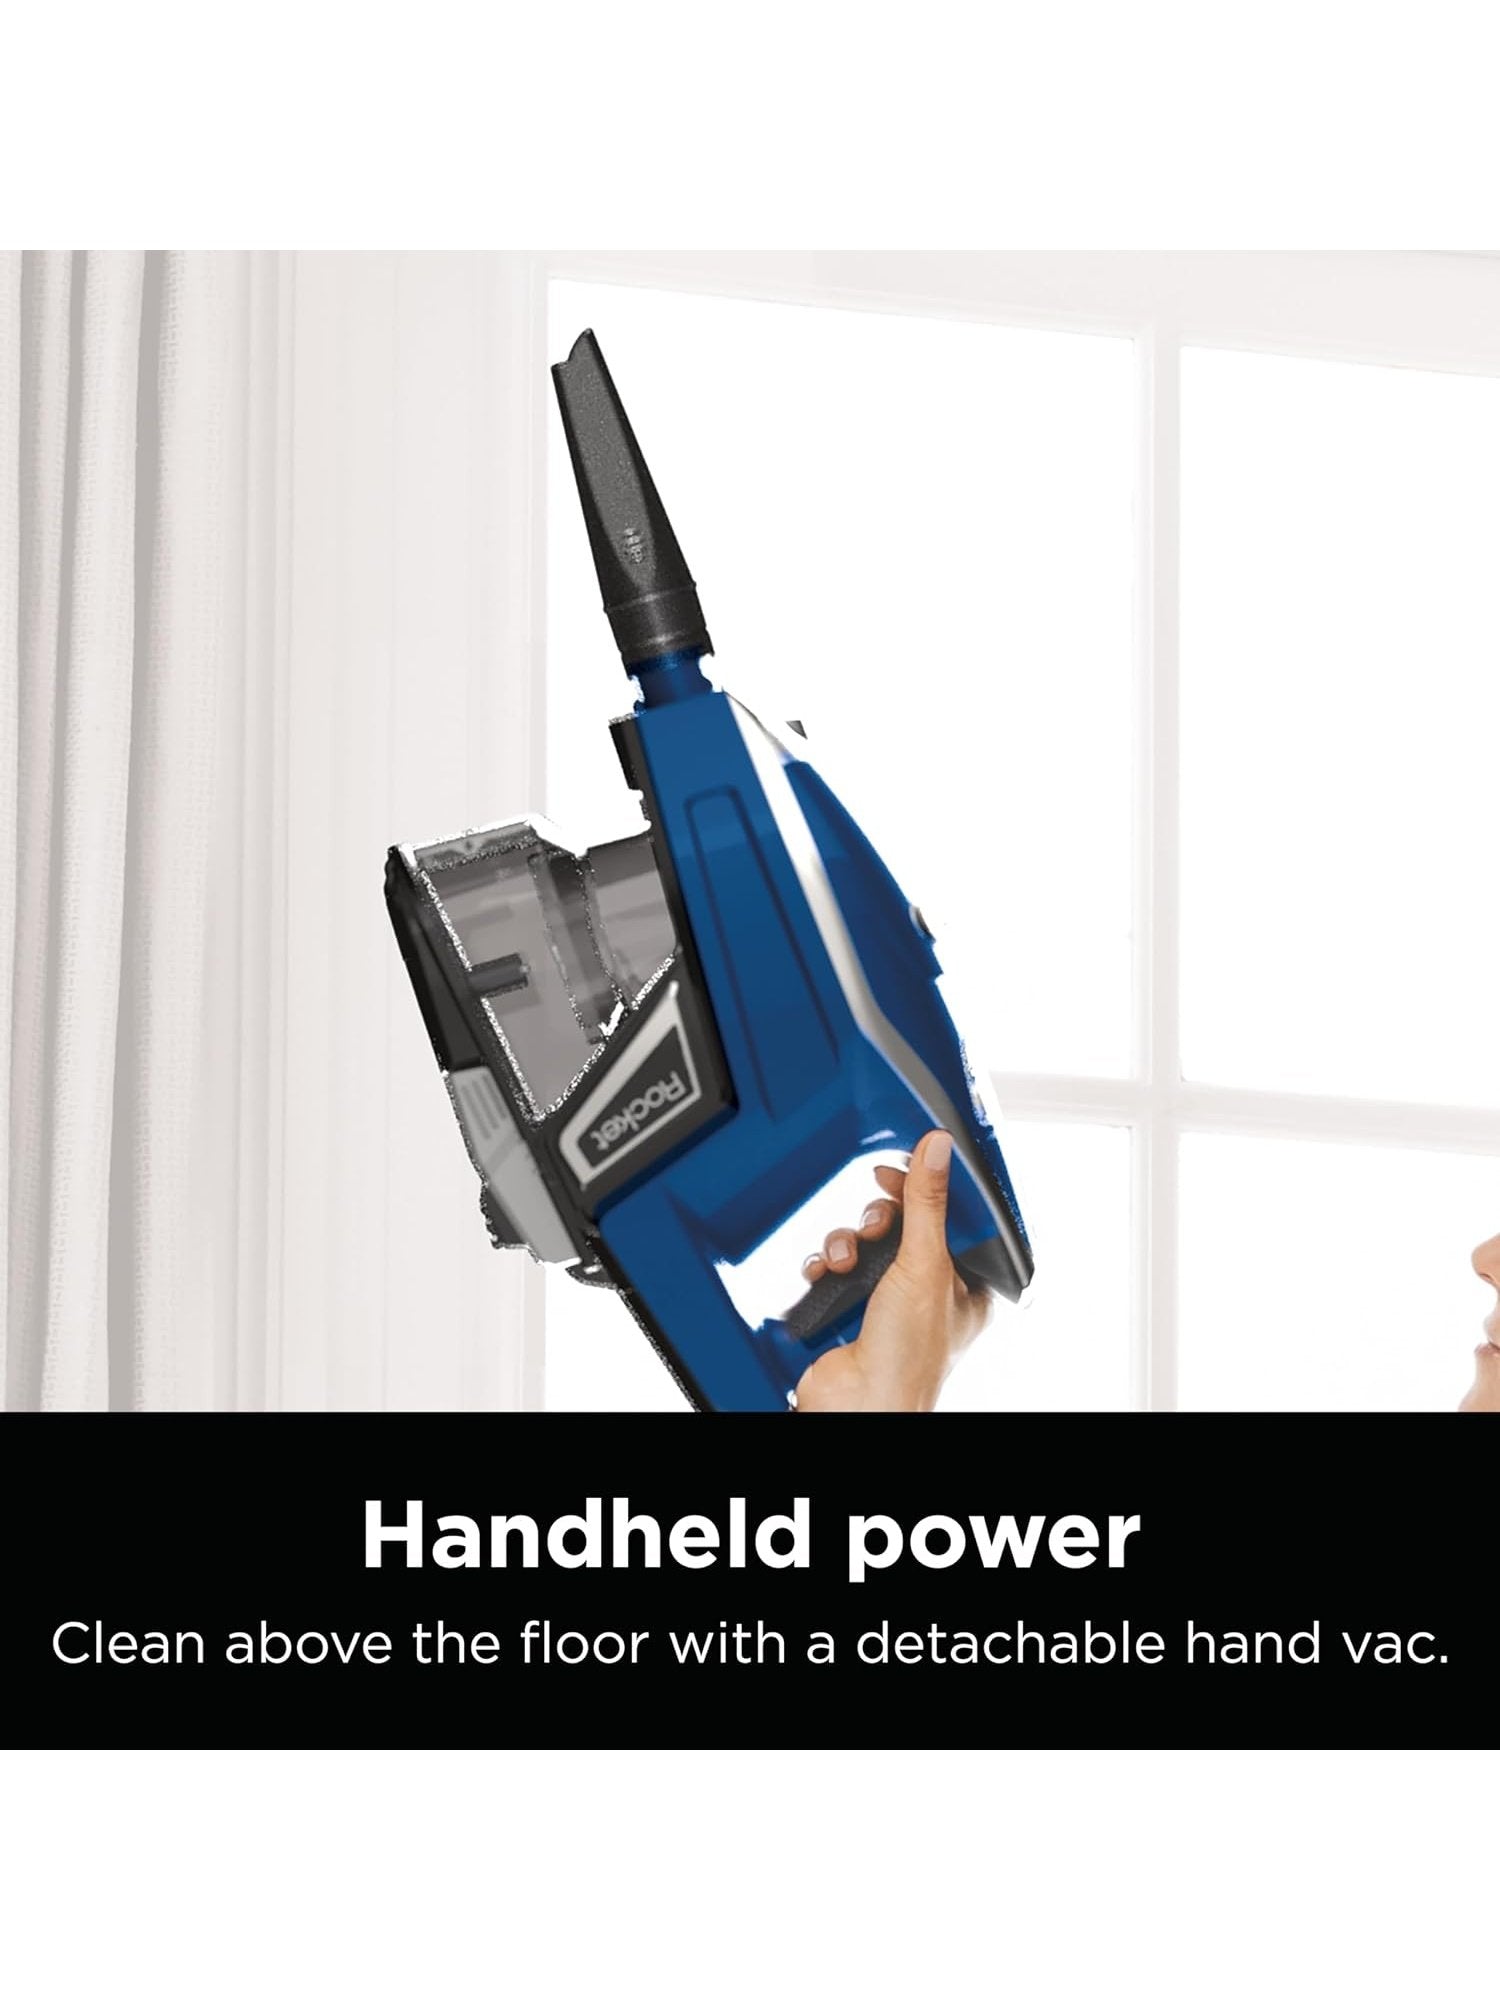 Shark HV343AMZ Rocket Corded Stick Vacuum with Self-Cleaning Brushroll, Lightweight & Maneuverable, Perfect for Pet Hair Pickup, Converts to a Hand Vacuum, Crevice Upholstery Tools, Blue/Silver